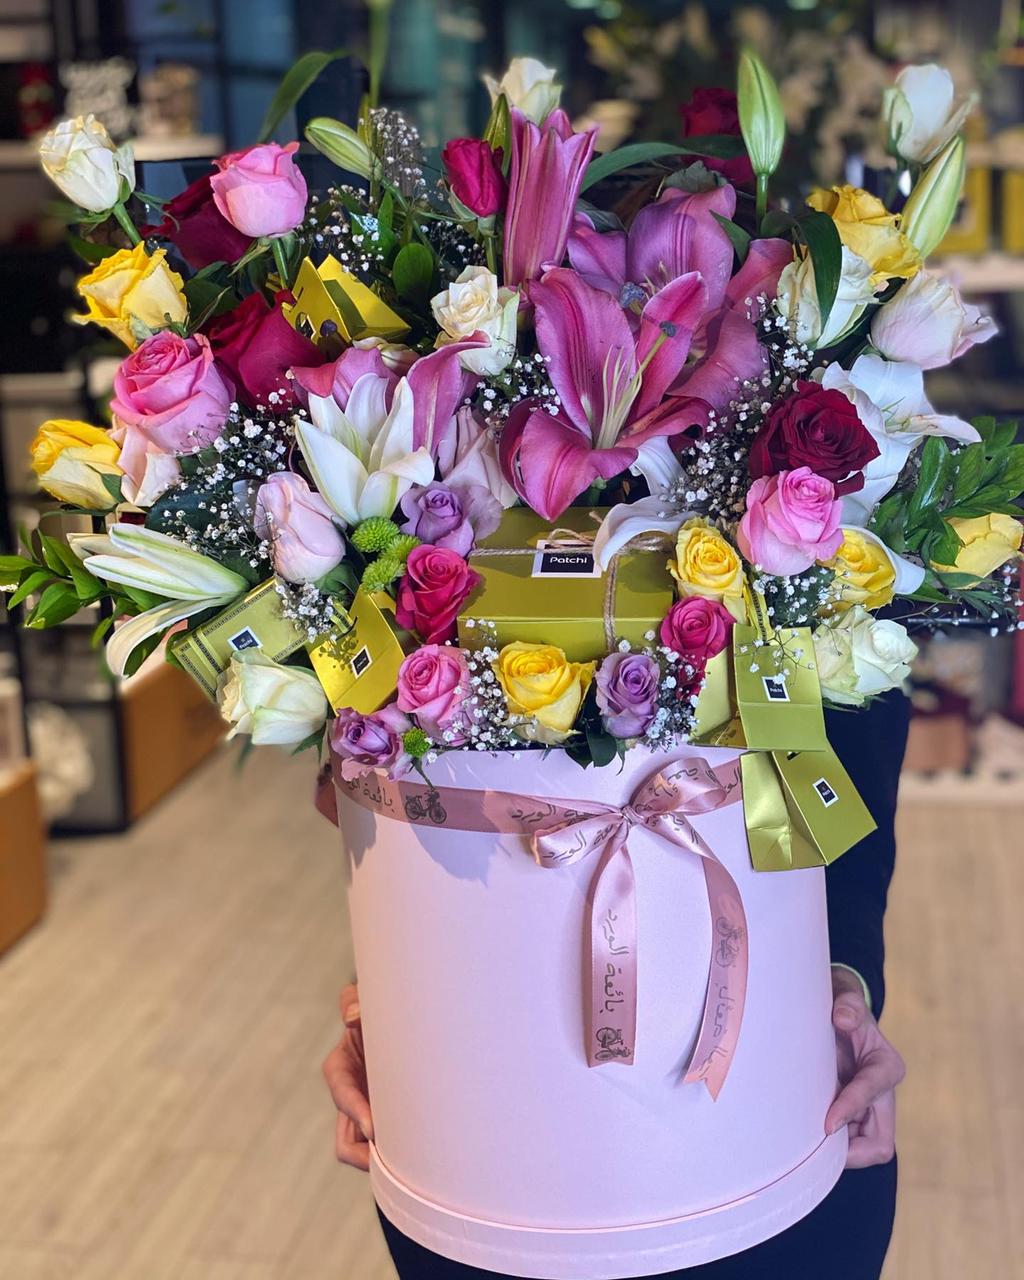 Mixed Flowers with Patchi - Bae3at Elward flower shop 